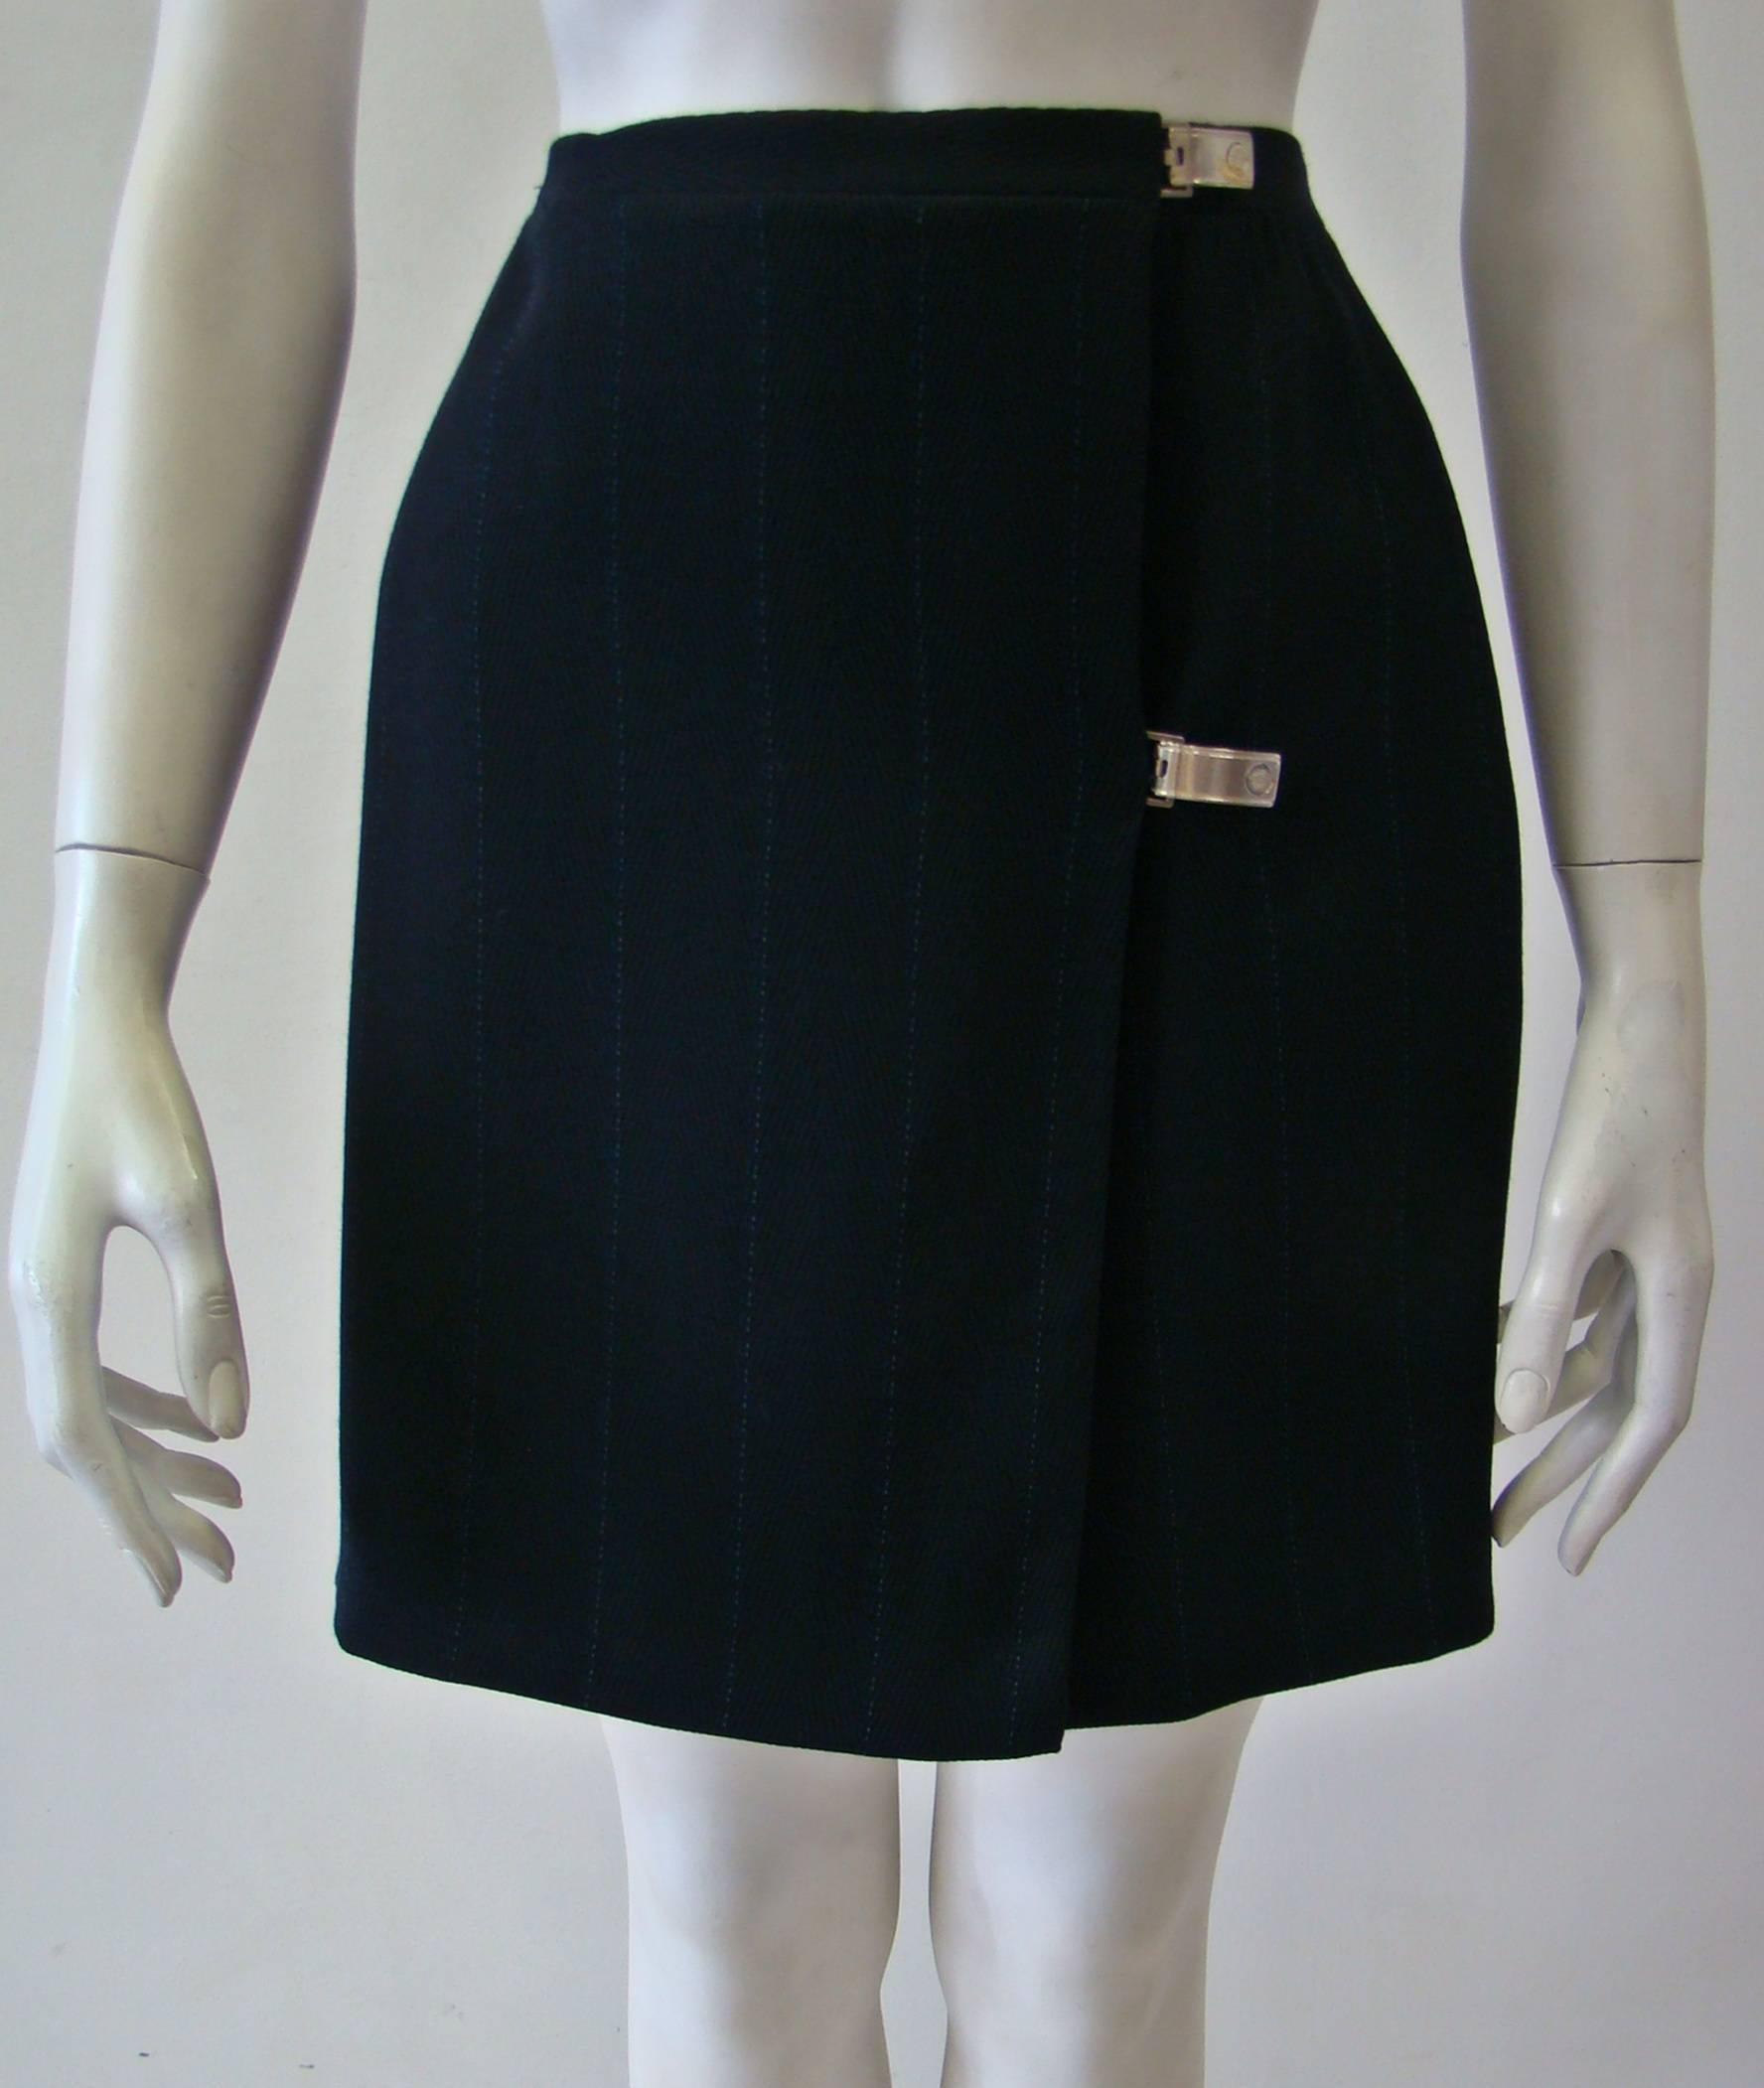 Gianni Versace Couture Navy Blue Skirt With Small Stripes Featuring A Wrap Up Detail Front. Fully Lined From The Inside With Medusa Print.